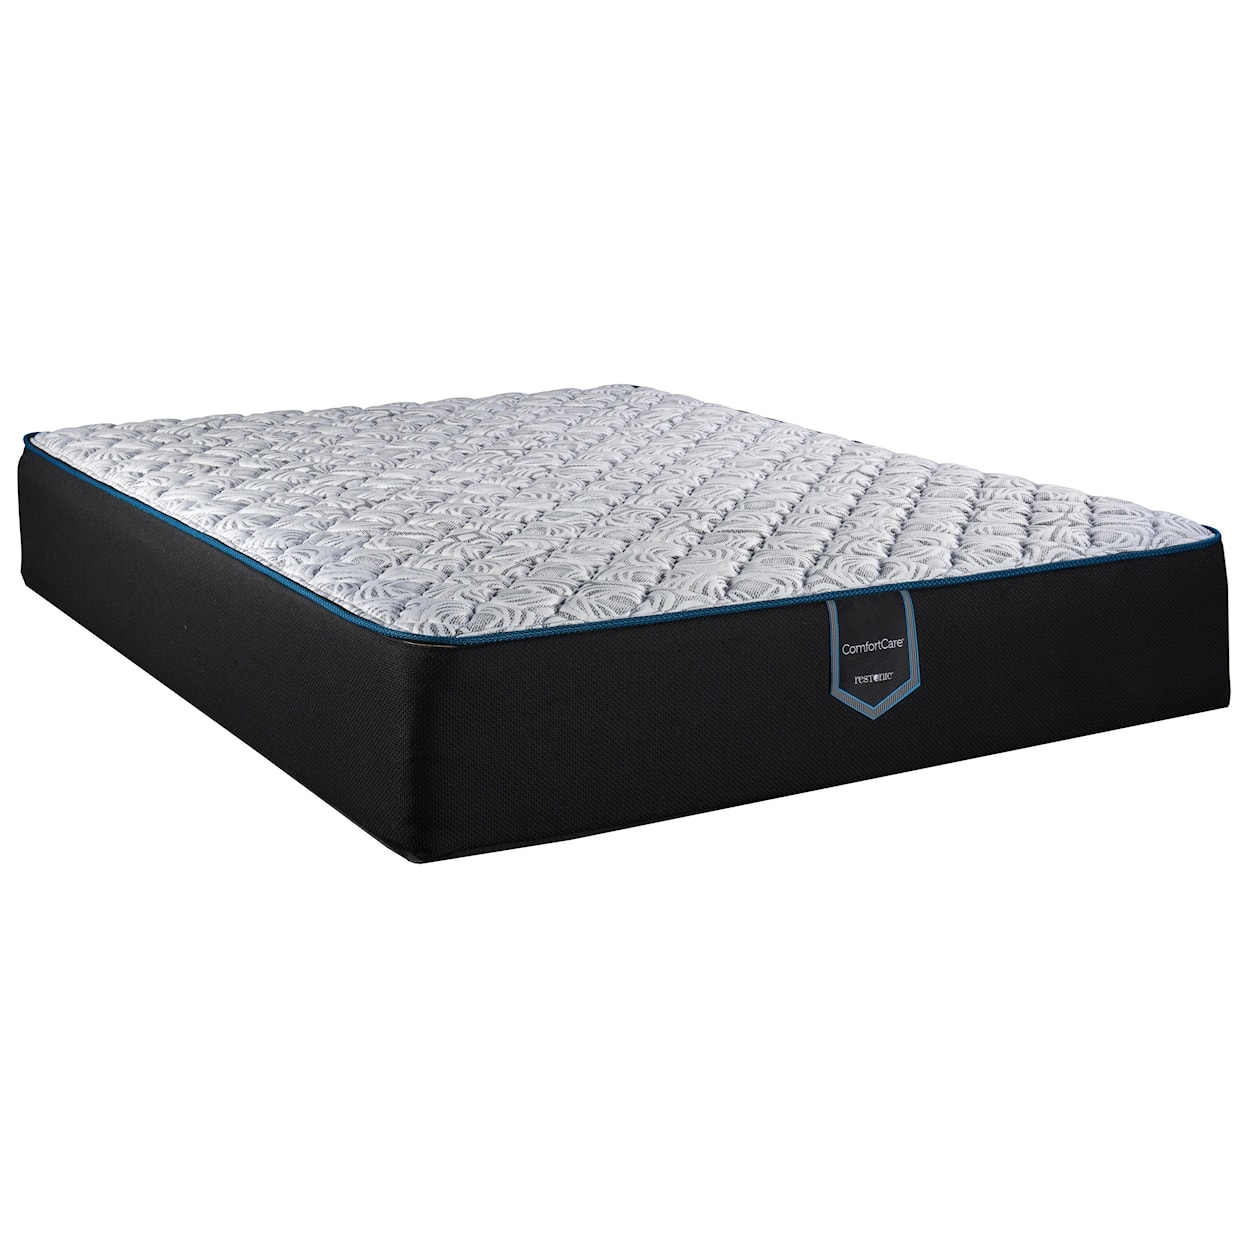 Restonic Arcadia Supreme Extra Firm Twin 13" Extra Firm Mattress